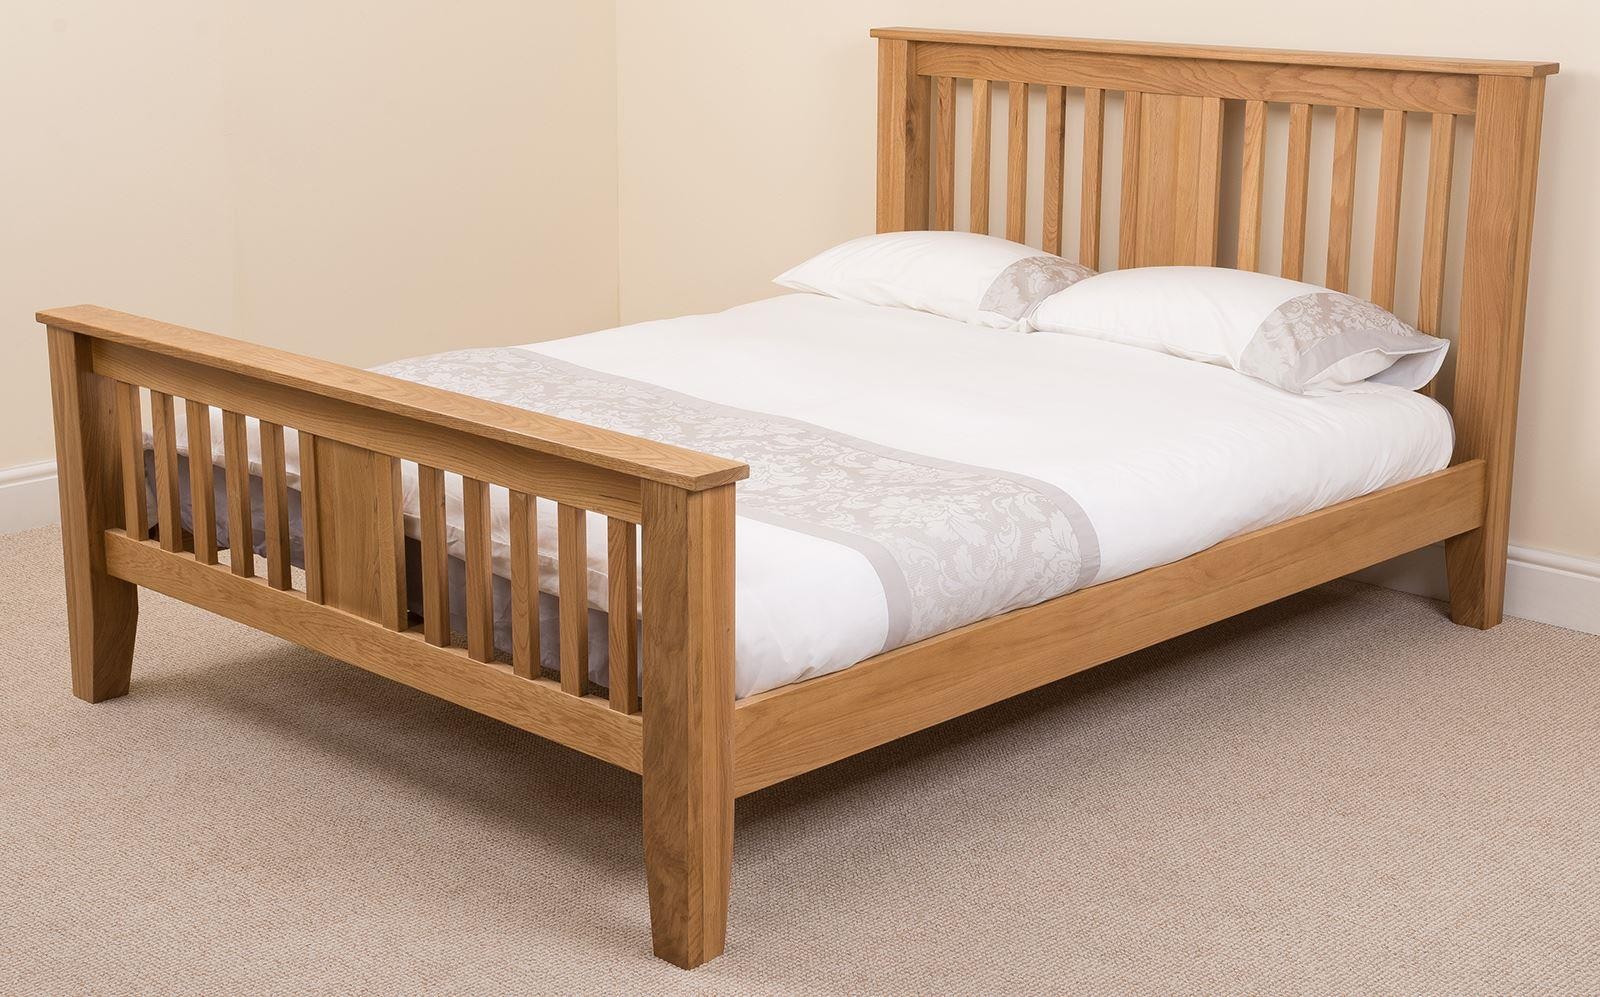 Boston 5ft King Size Bed And Mattress, Solid Oak King Size Bed